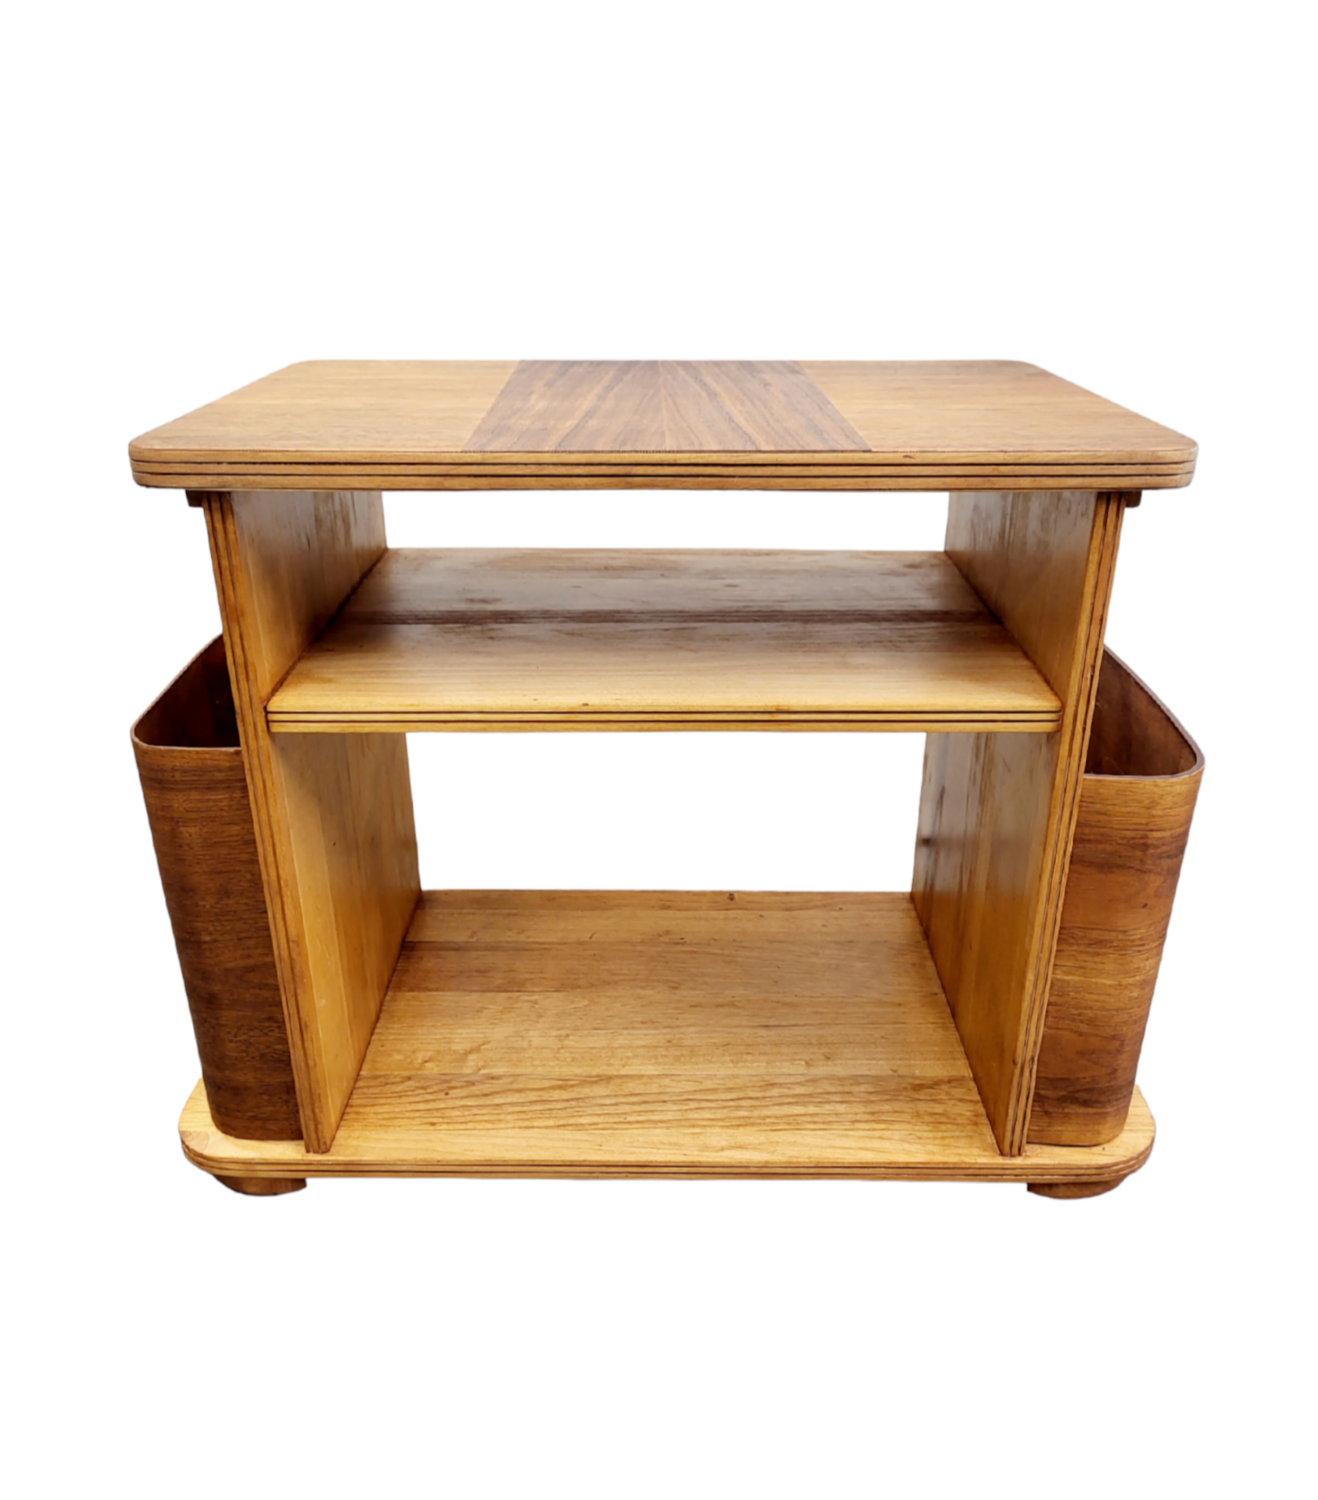 Antique Art Deco Walnut Side Table with Bentwood Storage Pockets